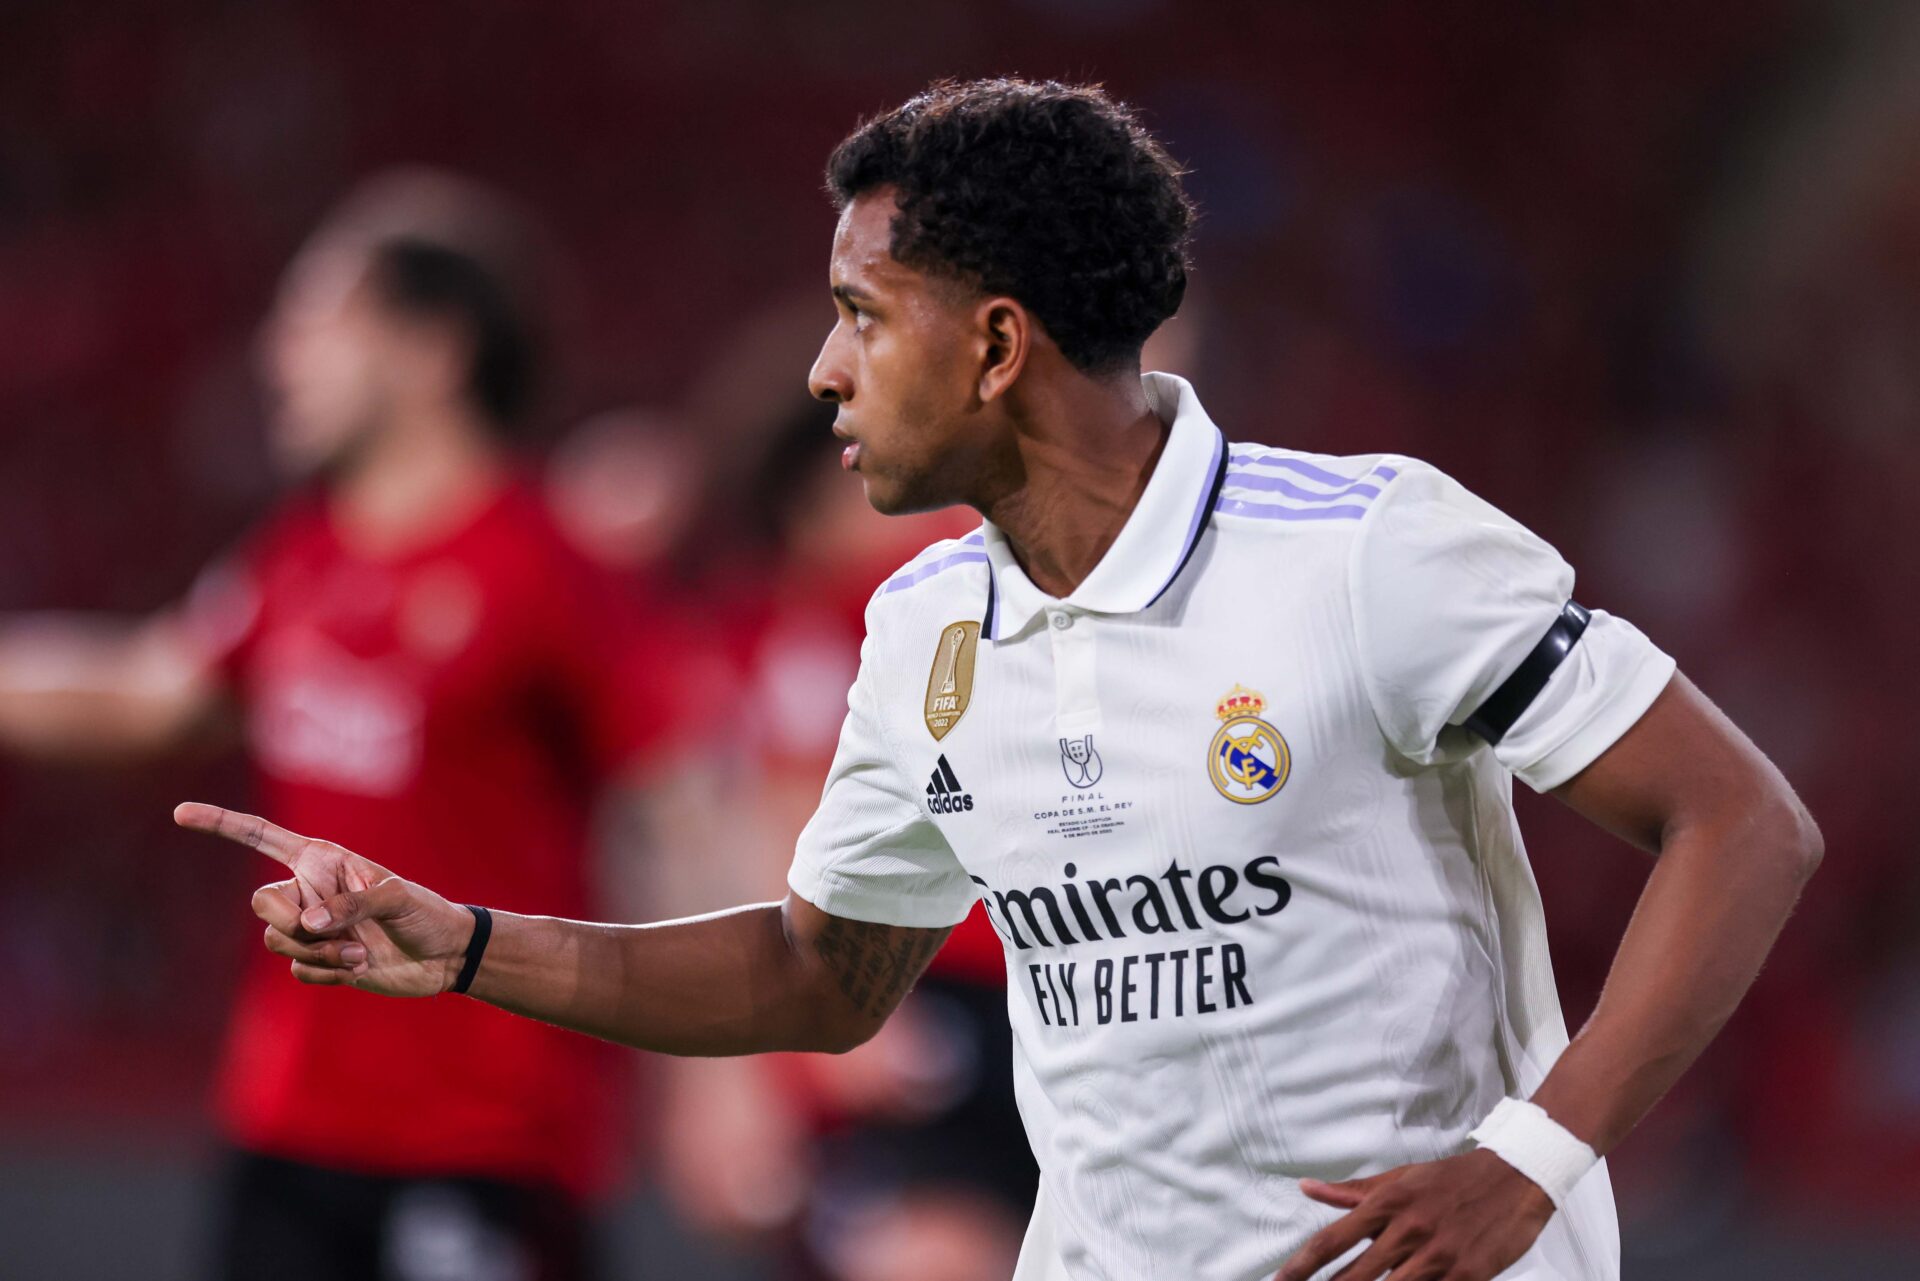 Real Madrid player Rodrygo will stay amid interests from Liverpool